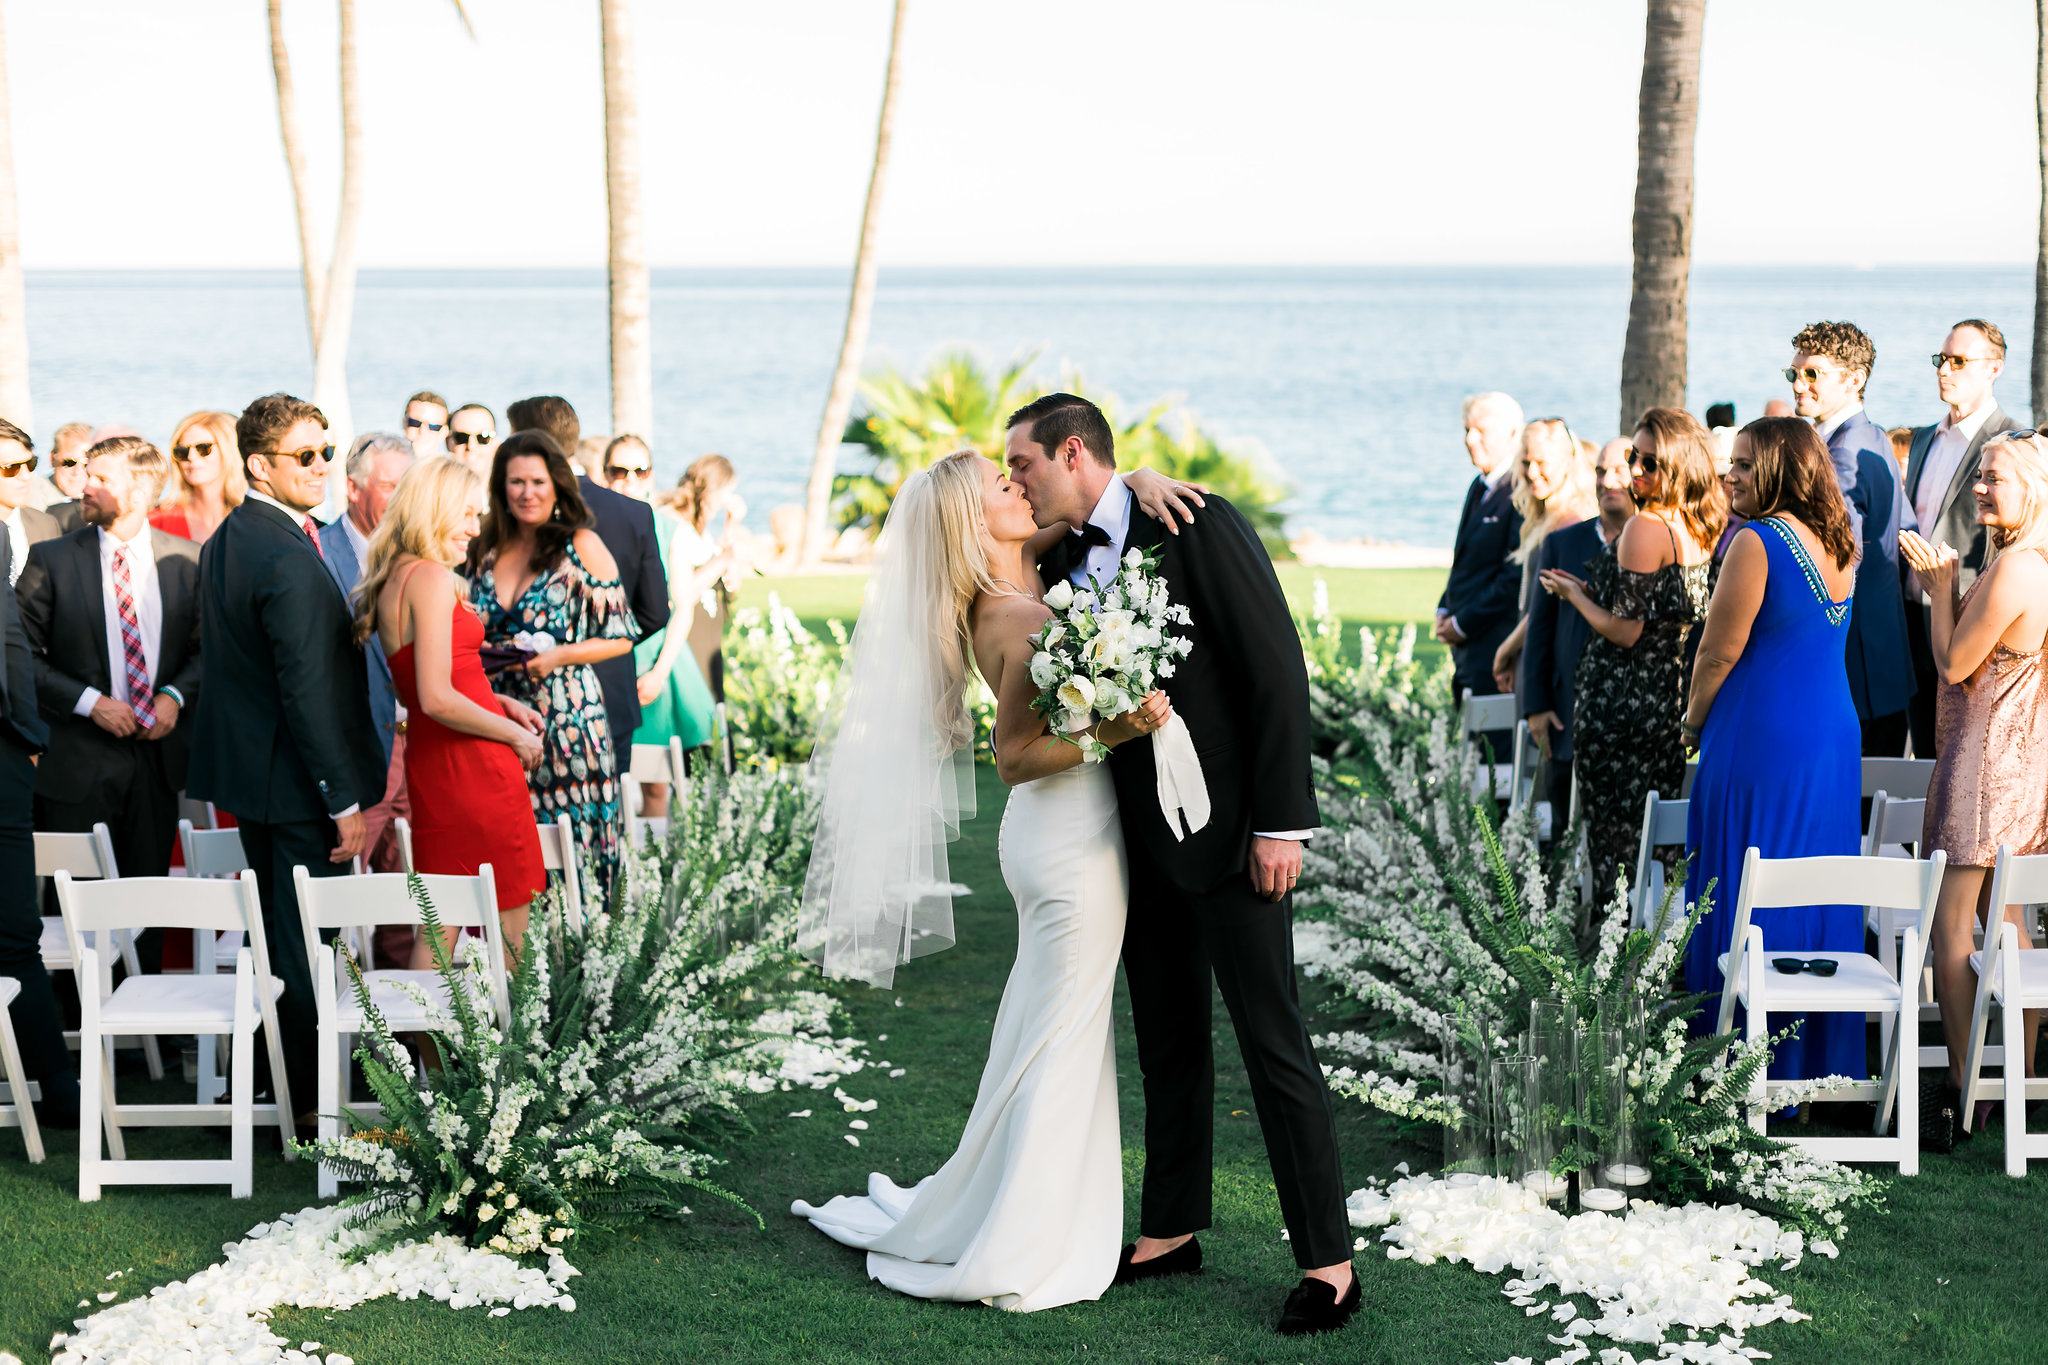 the happy couple at their White Wedding At The One & Only Palmilla